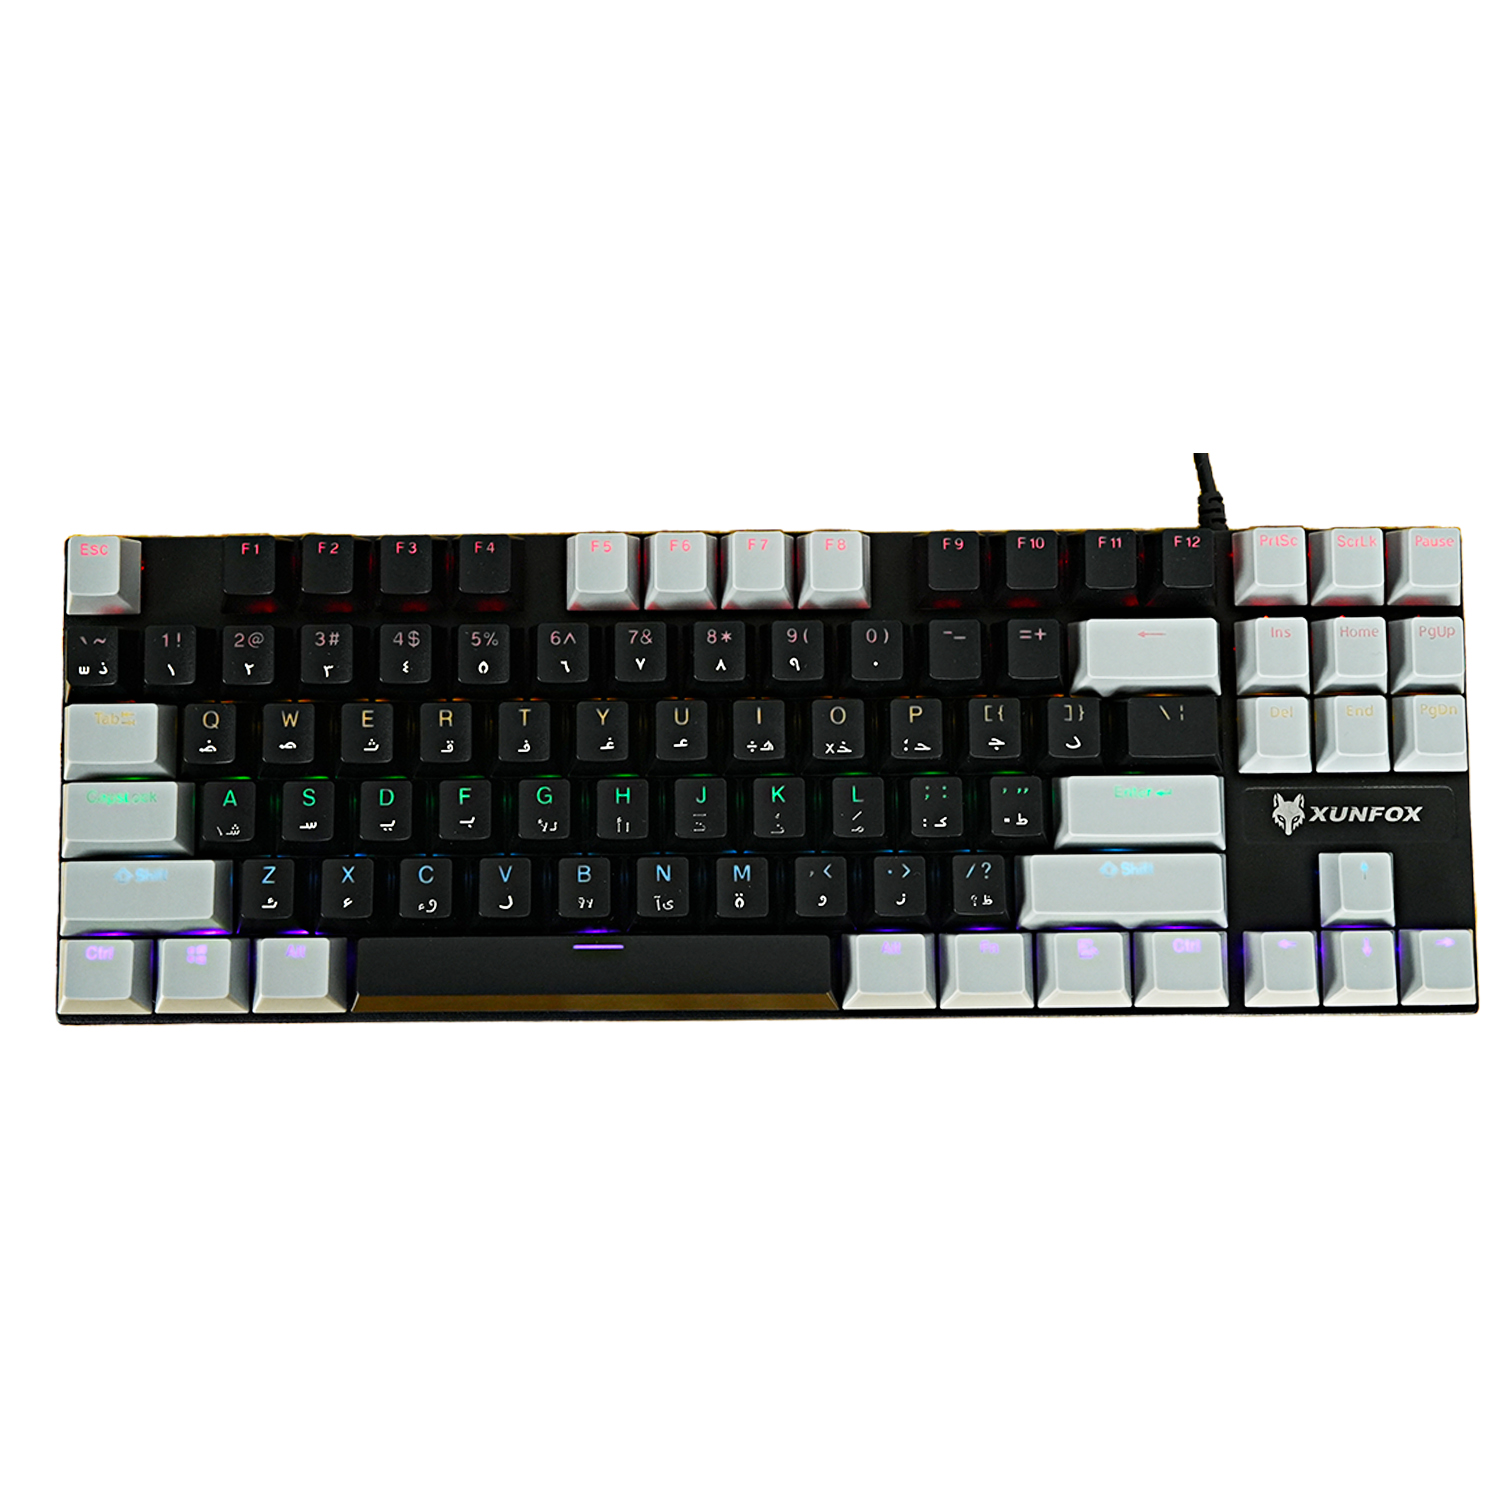 English Arabic Mechanical Gaming Keyboard with RGB Backlit, USB Wired 87 Keys Blue Switch Keyboard for Windows/MacOS/Android PC Gamers